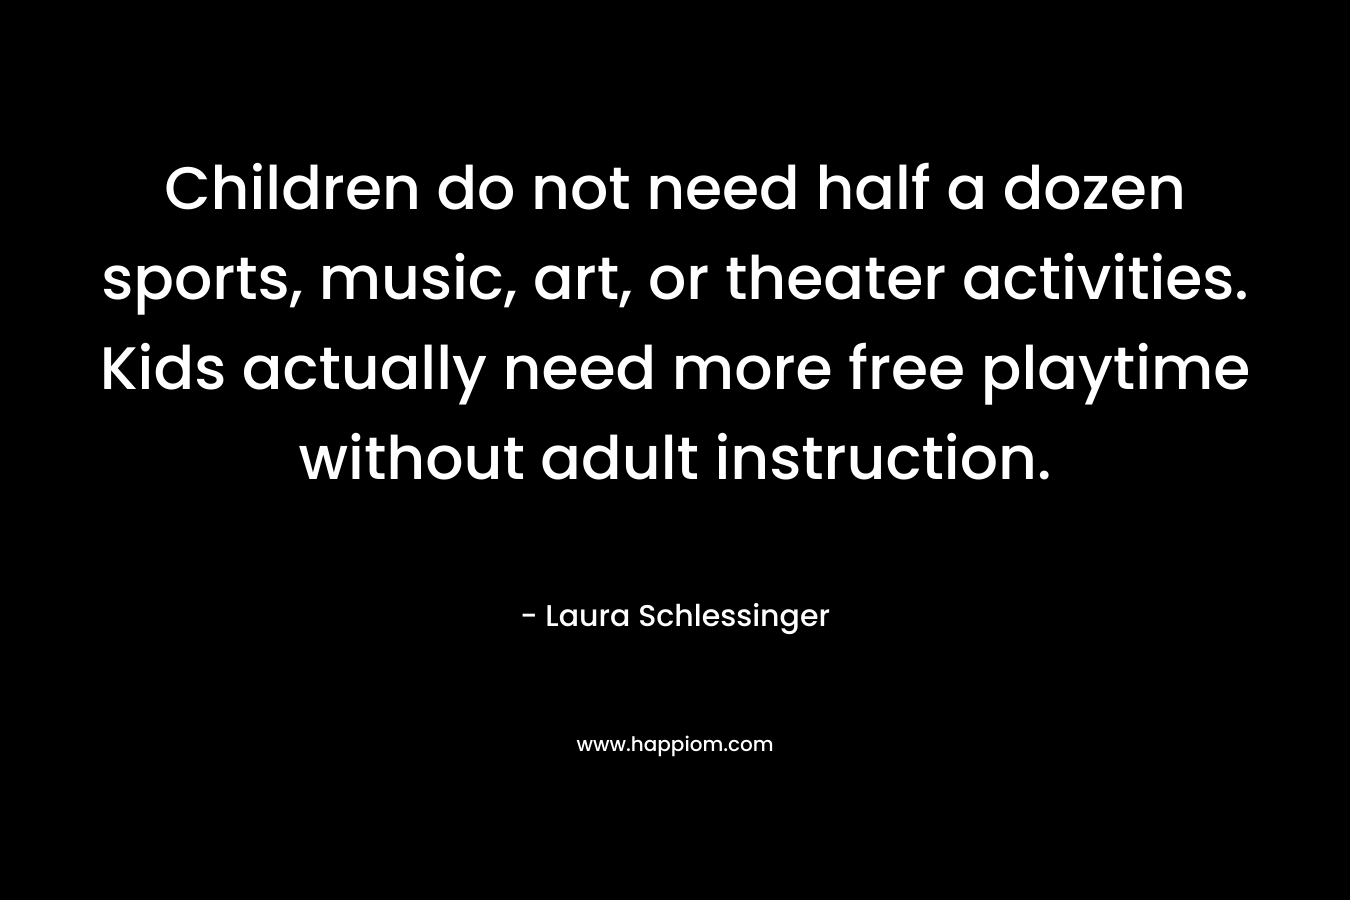 Children do not need half a dozen sports, music, art, or theater activities. Kids actually need more free playtime without adult instruction. – Laura Schlessinger